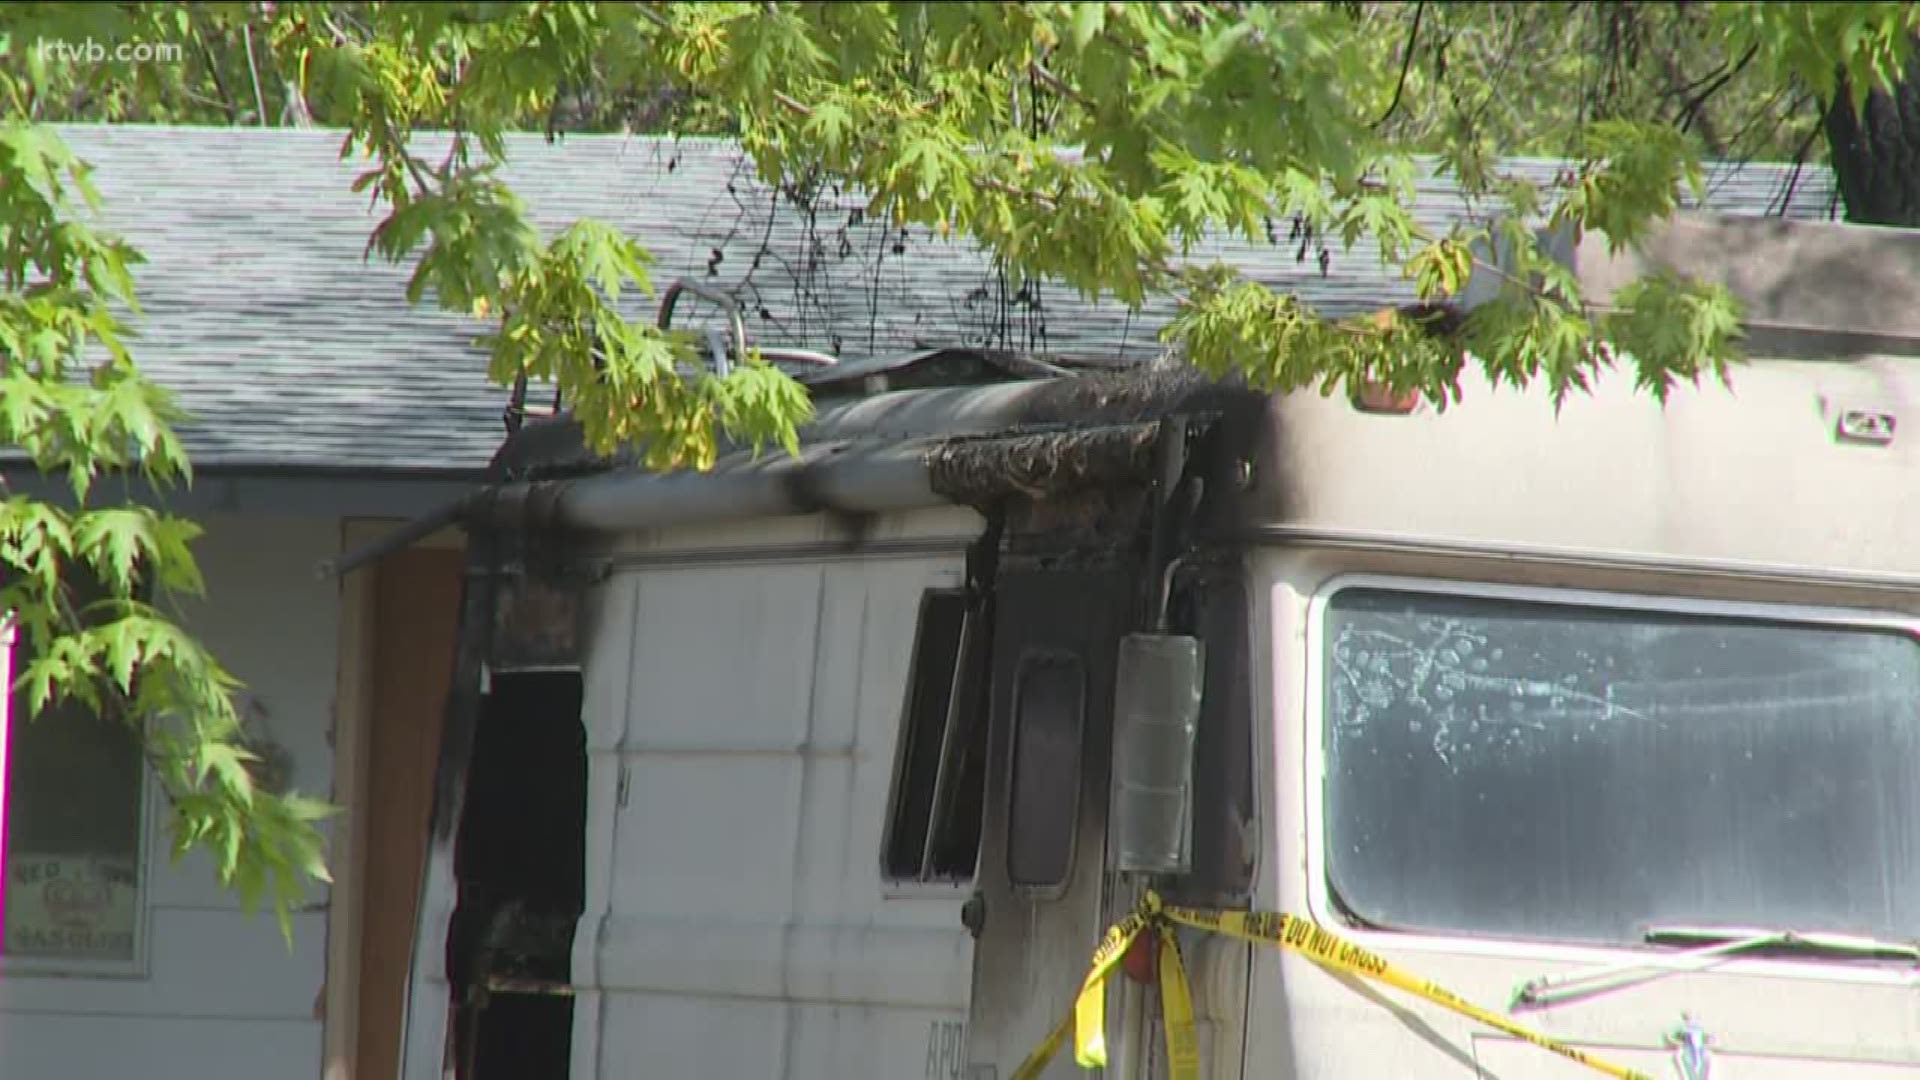 Fire crews got to the scene at about 7:45 p.m. Friday but the motorhome was already engulfed by the fire.